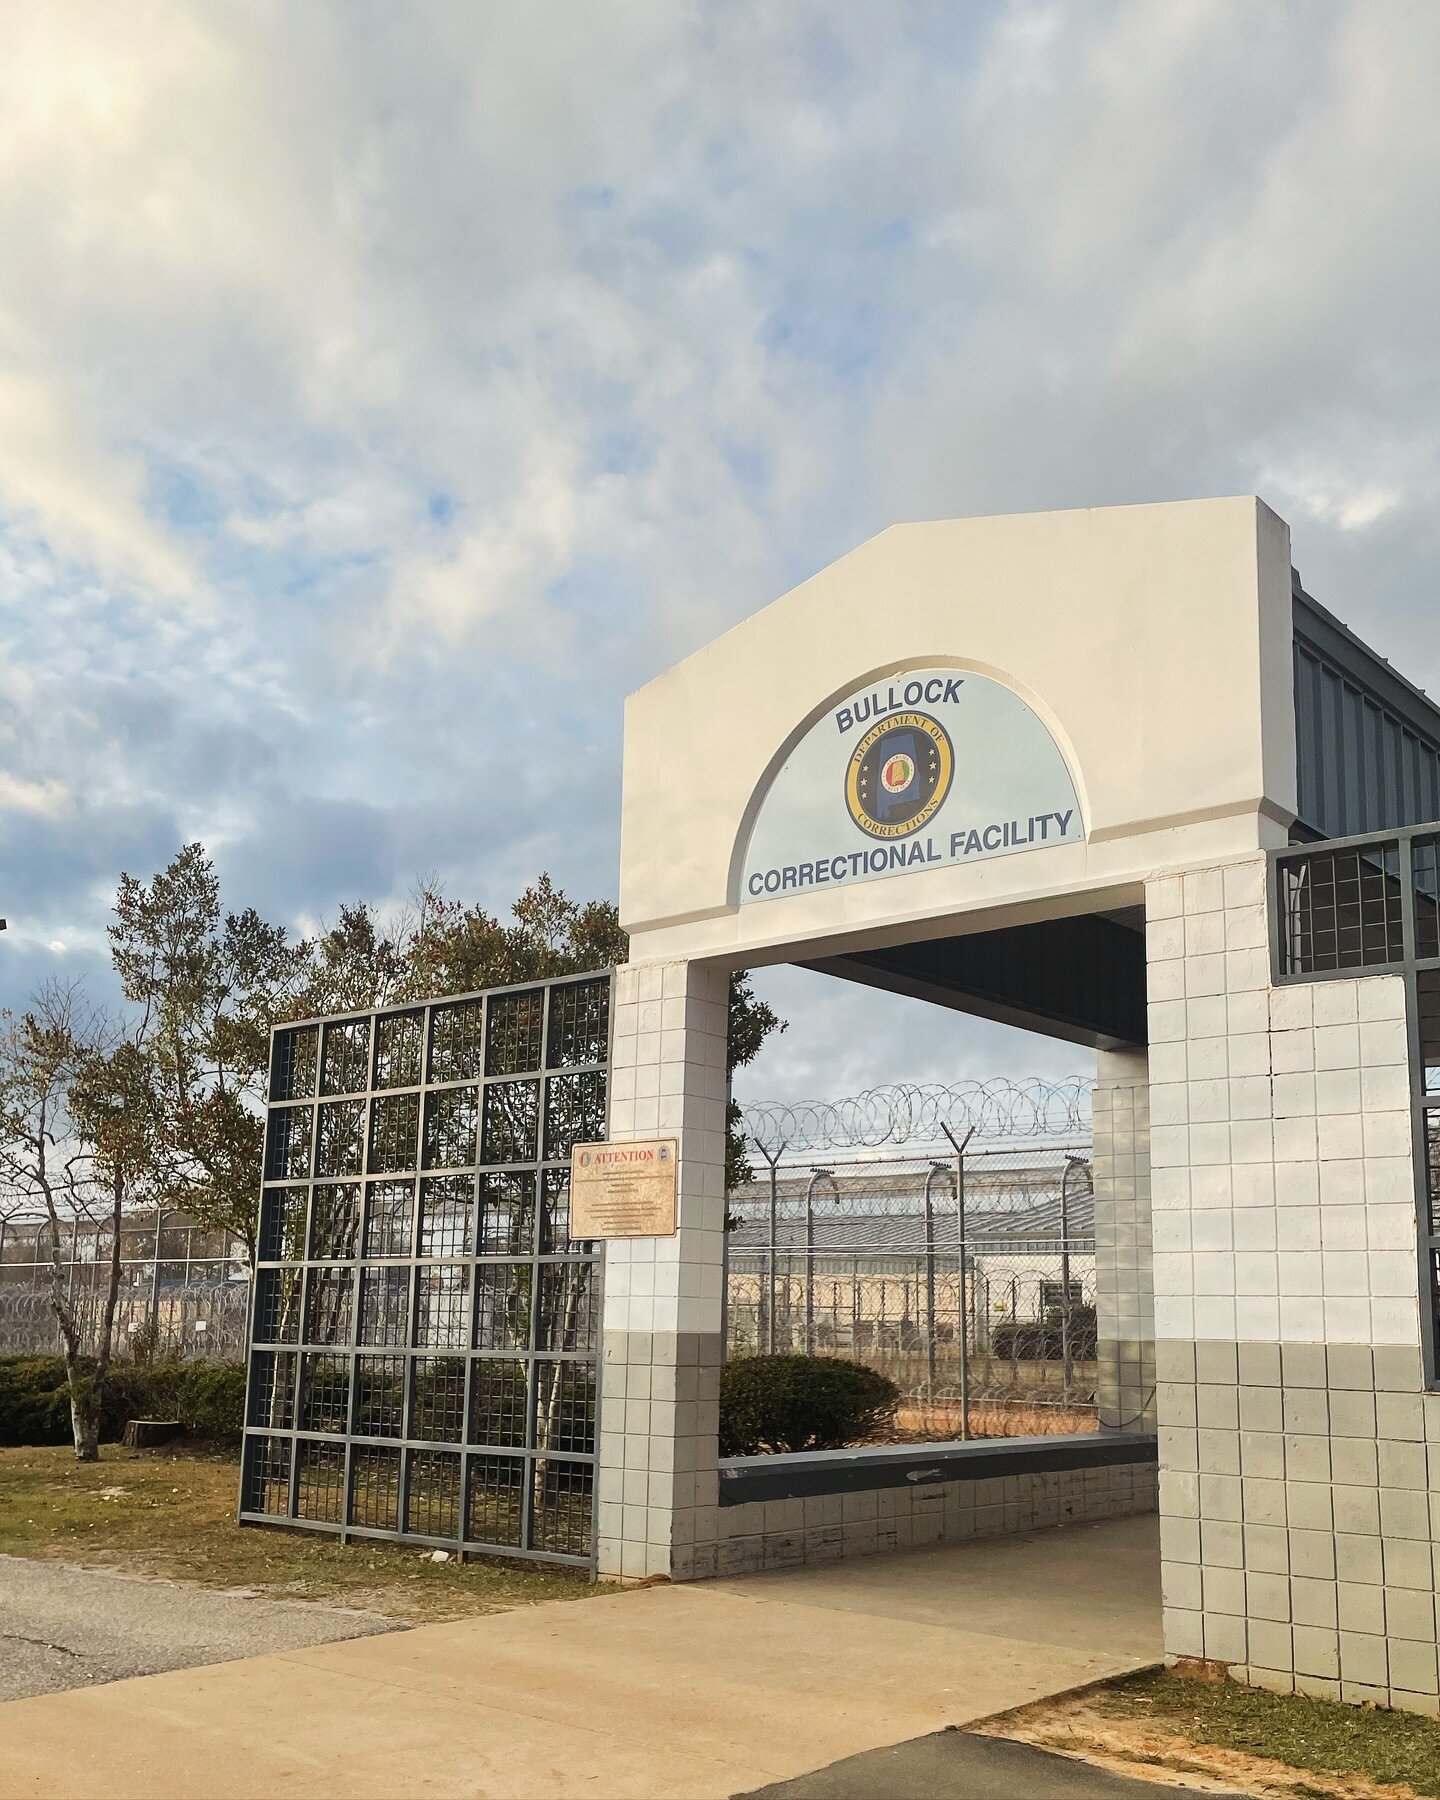 The next few posts will be about my visit to Bullock Correctional Facility for men where I played a concert, made possible by Alabama Prison Arts &amp; Education Program. To check out my full write-up about the experinece, go to gatherhear.com/alabam